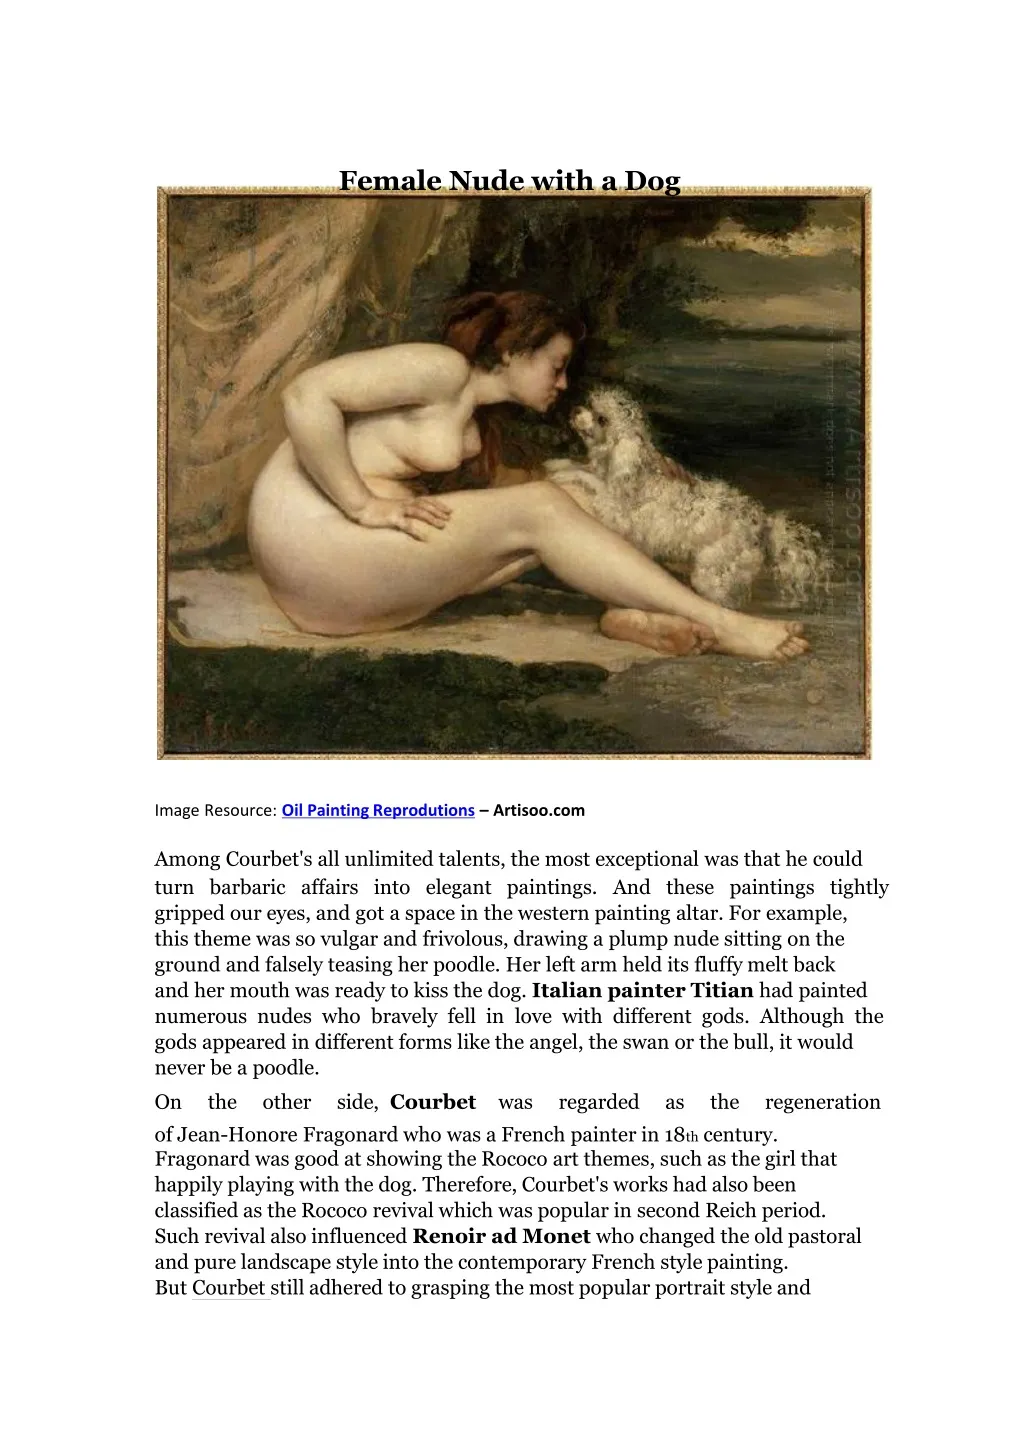 female nude with a dog image resource